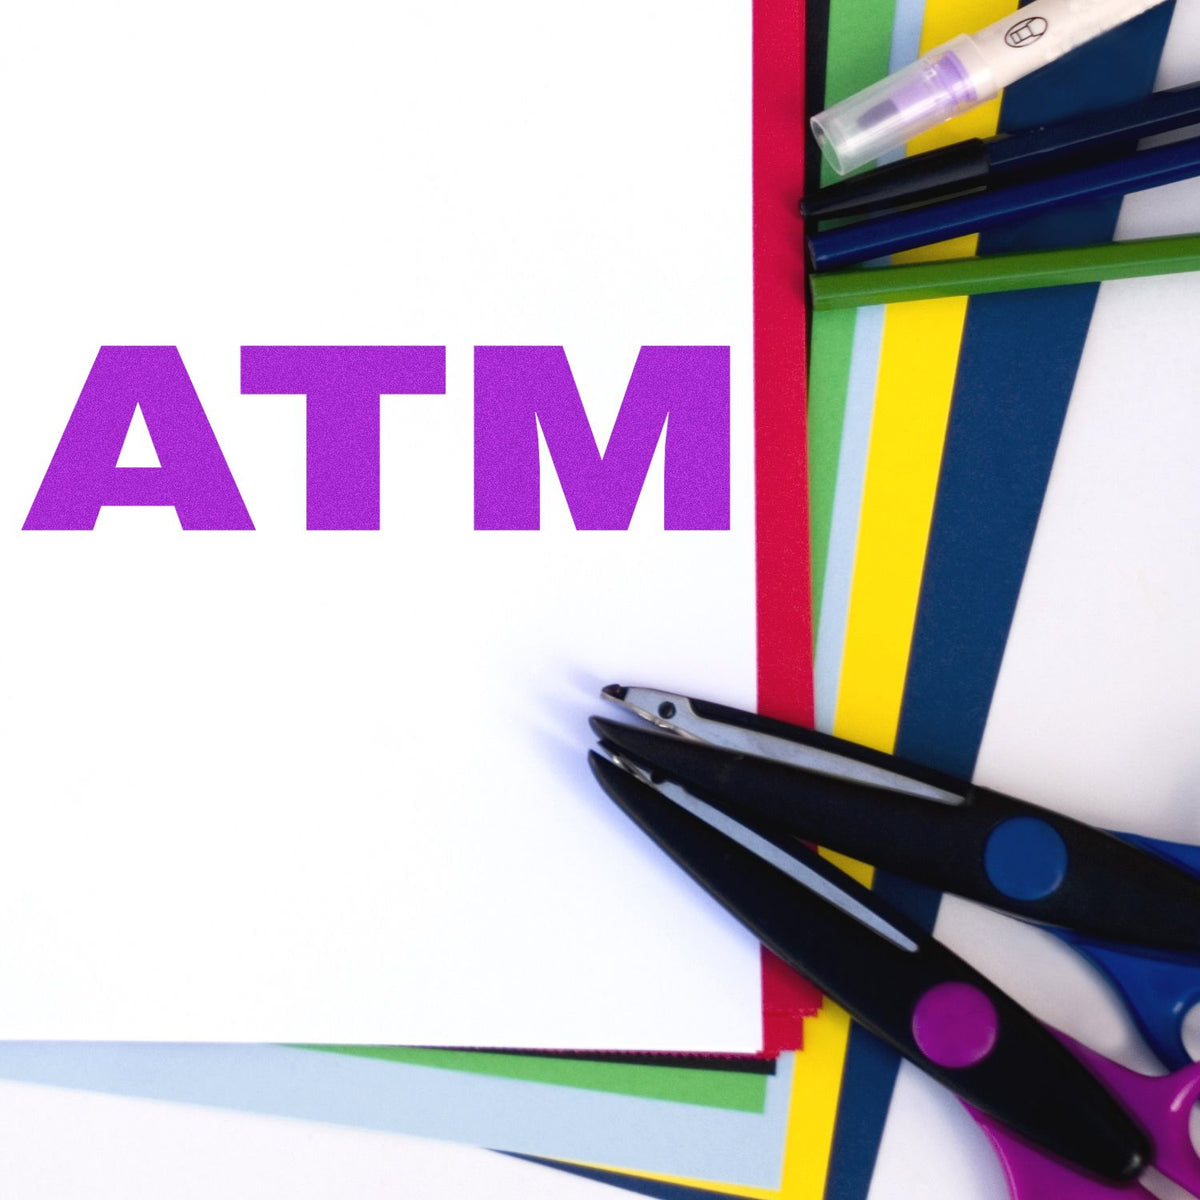 Large ATM Rubber Stamp In Use